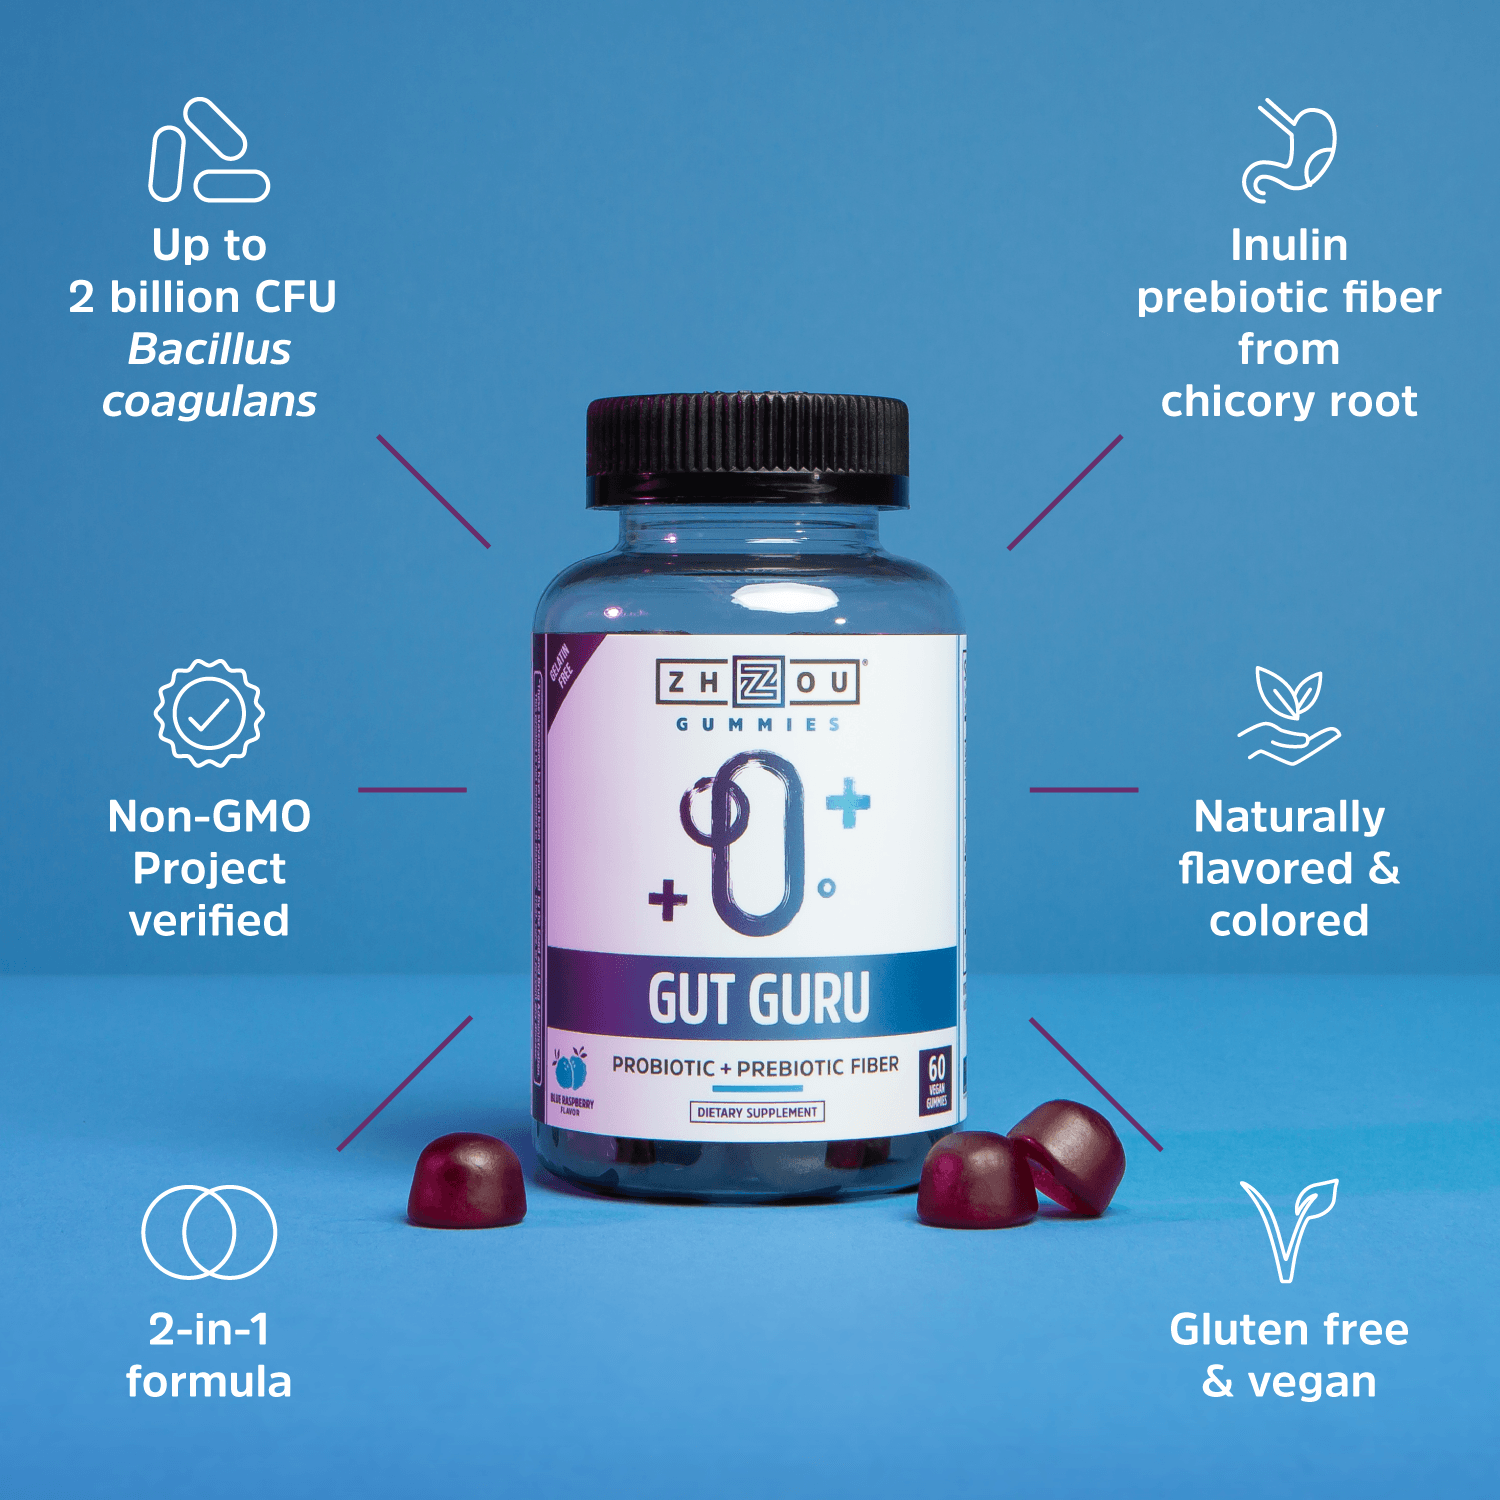 Up to 2 billion CFU bacillus coagulans. Inulin prebiotic fiber from chicory root. Non-GMO project verified. Naturally flavored & colored. 2-in-1 formula. Gluten free and vegan.